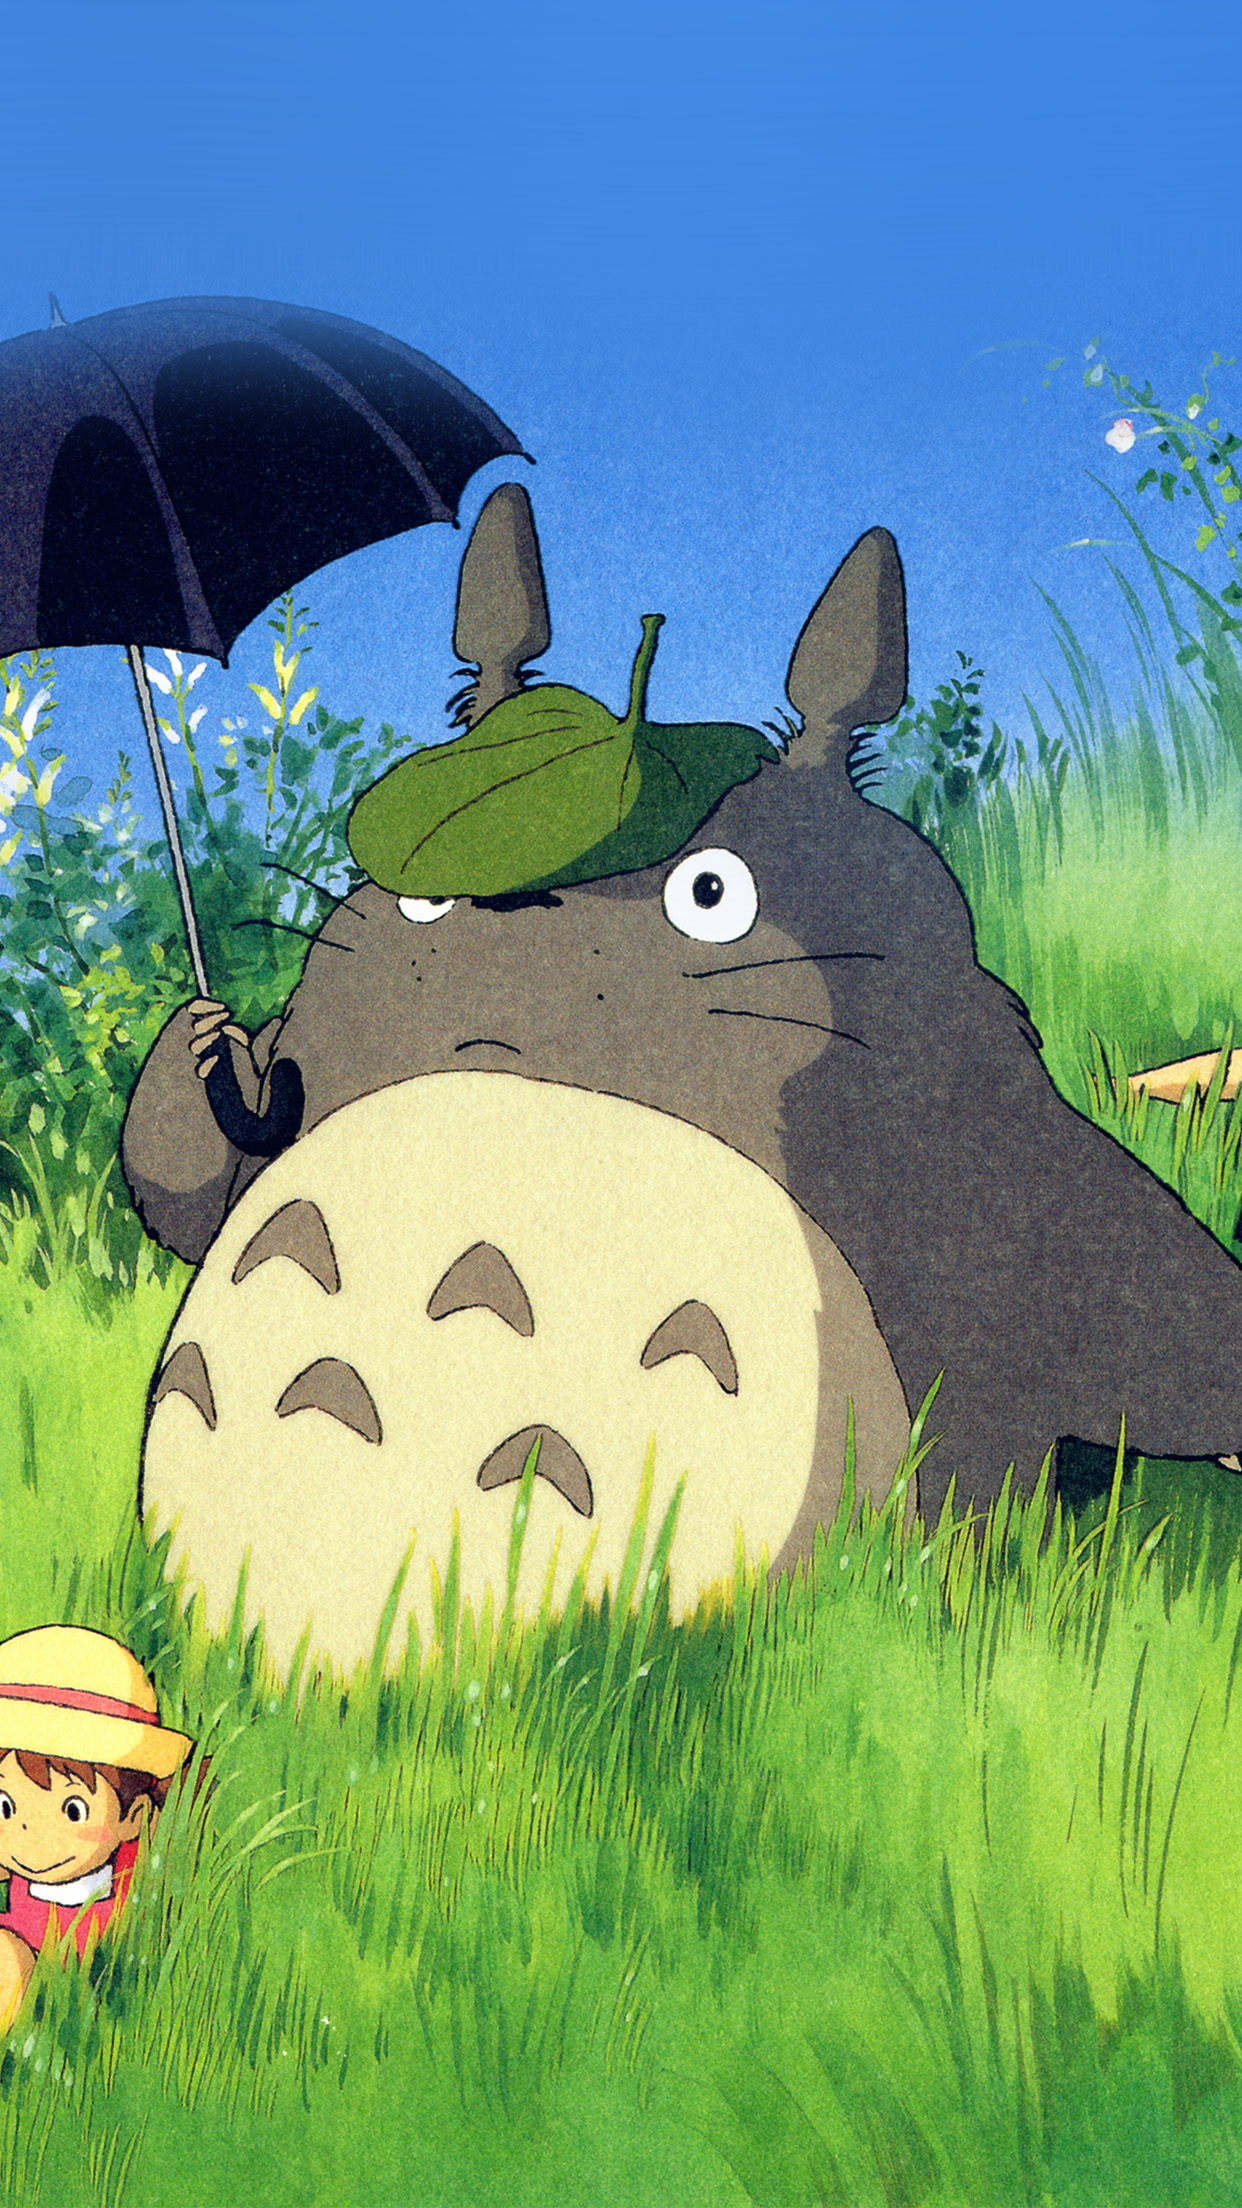 Totoro Art Cute Anime Illustration Android Wallpaper Android Hd